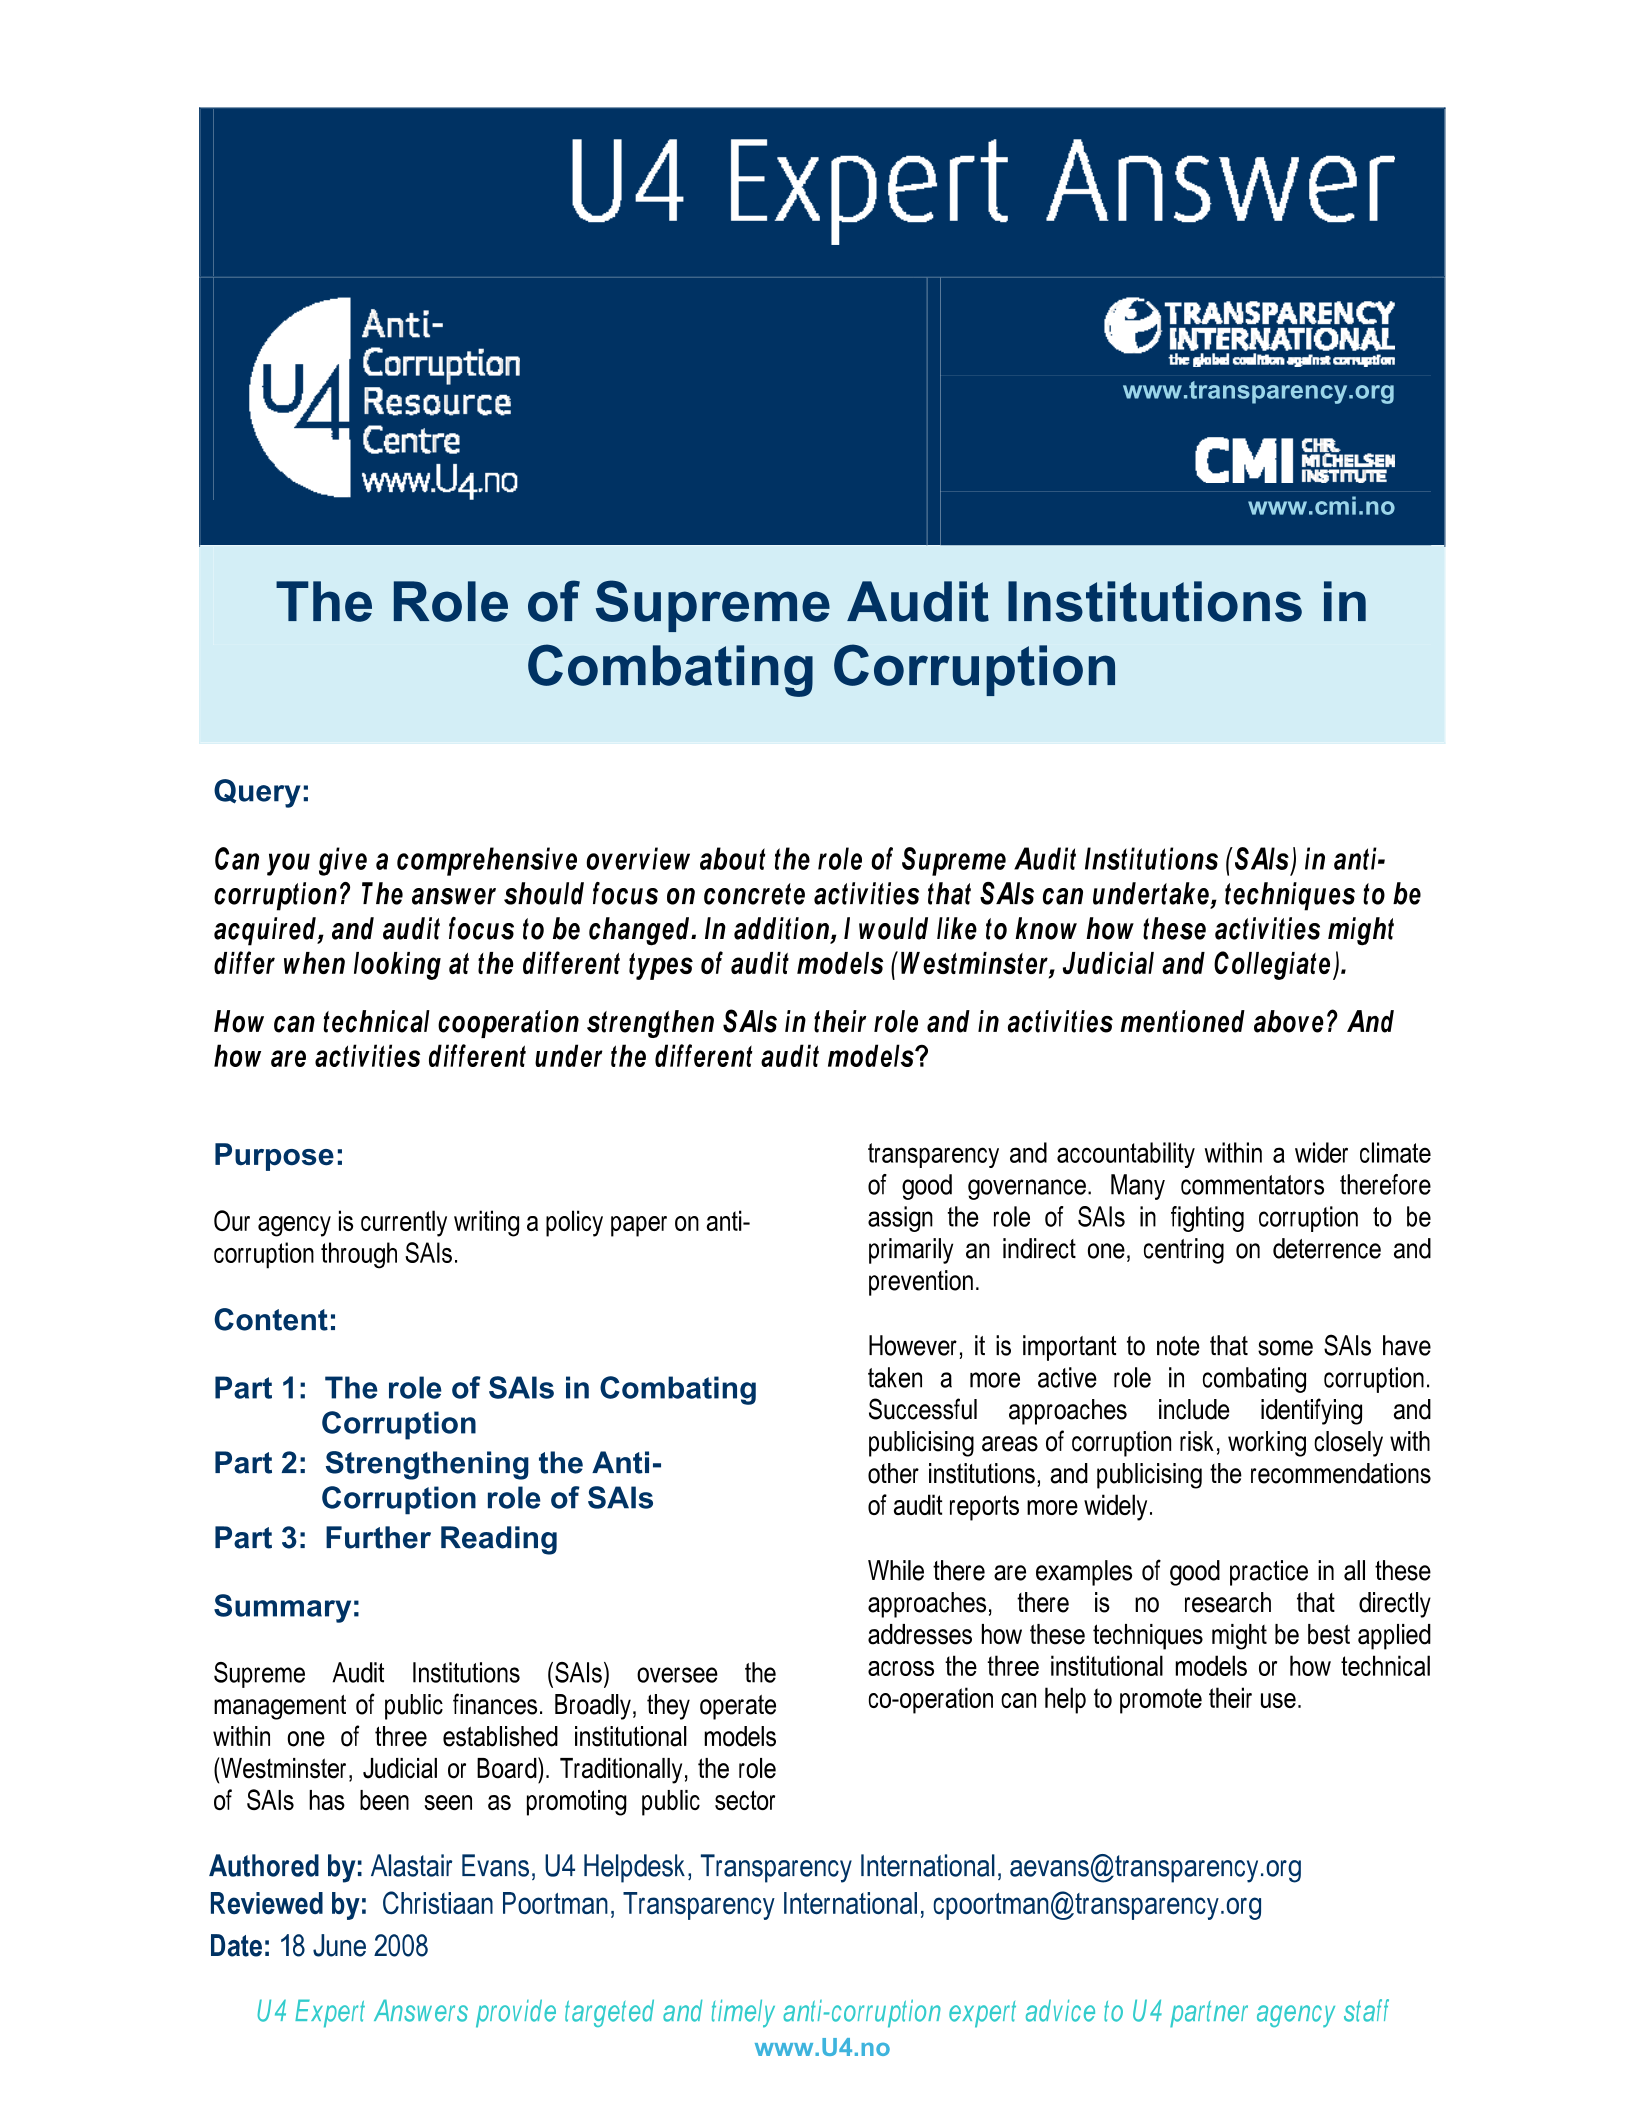 The role of supreme audit institutions in combating corruption